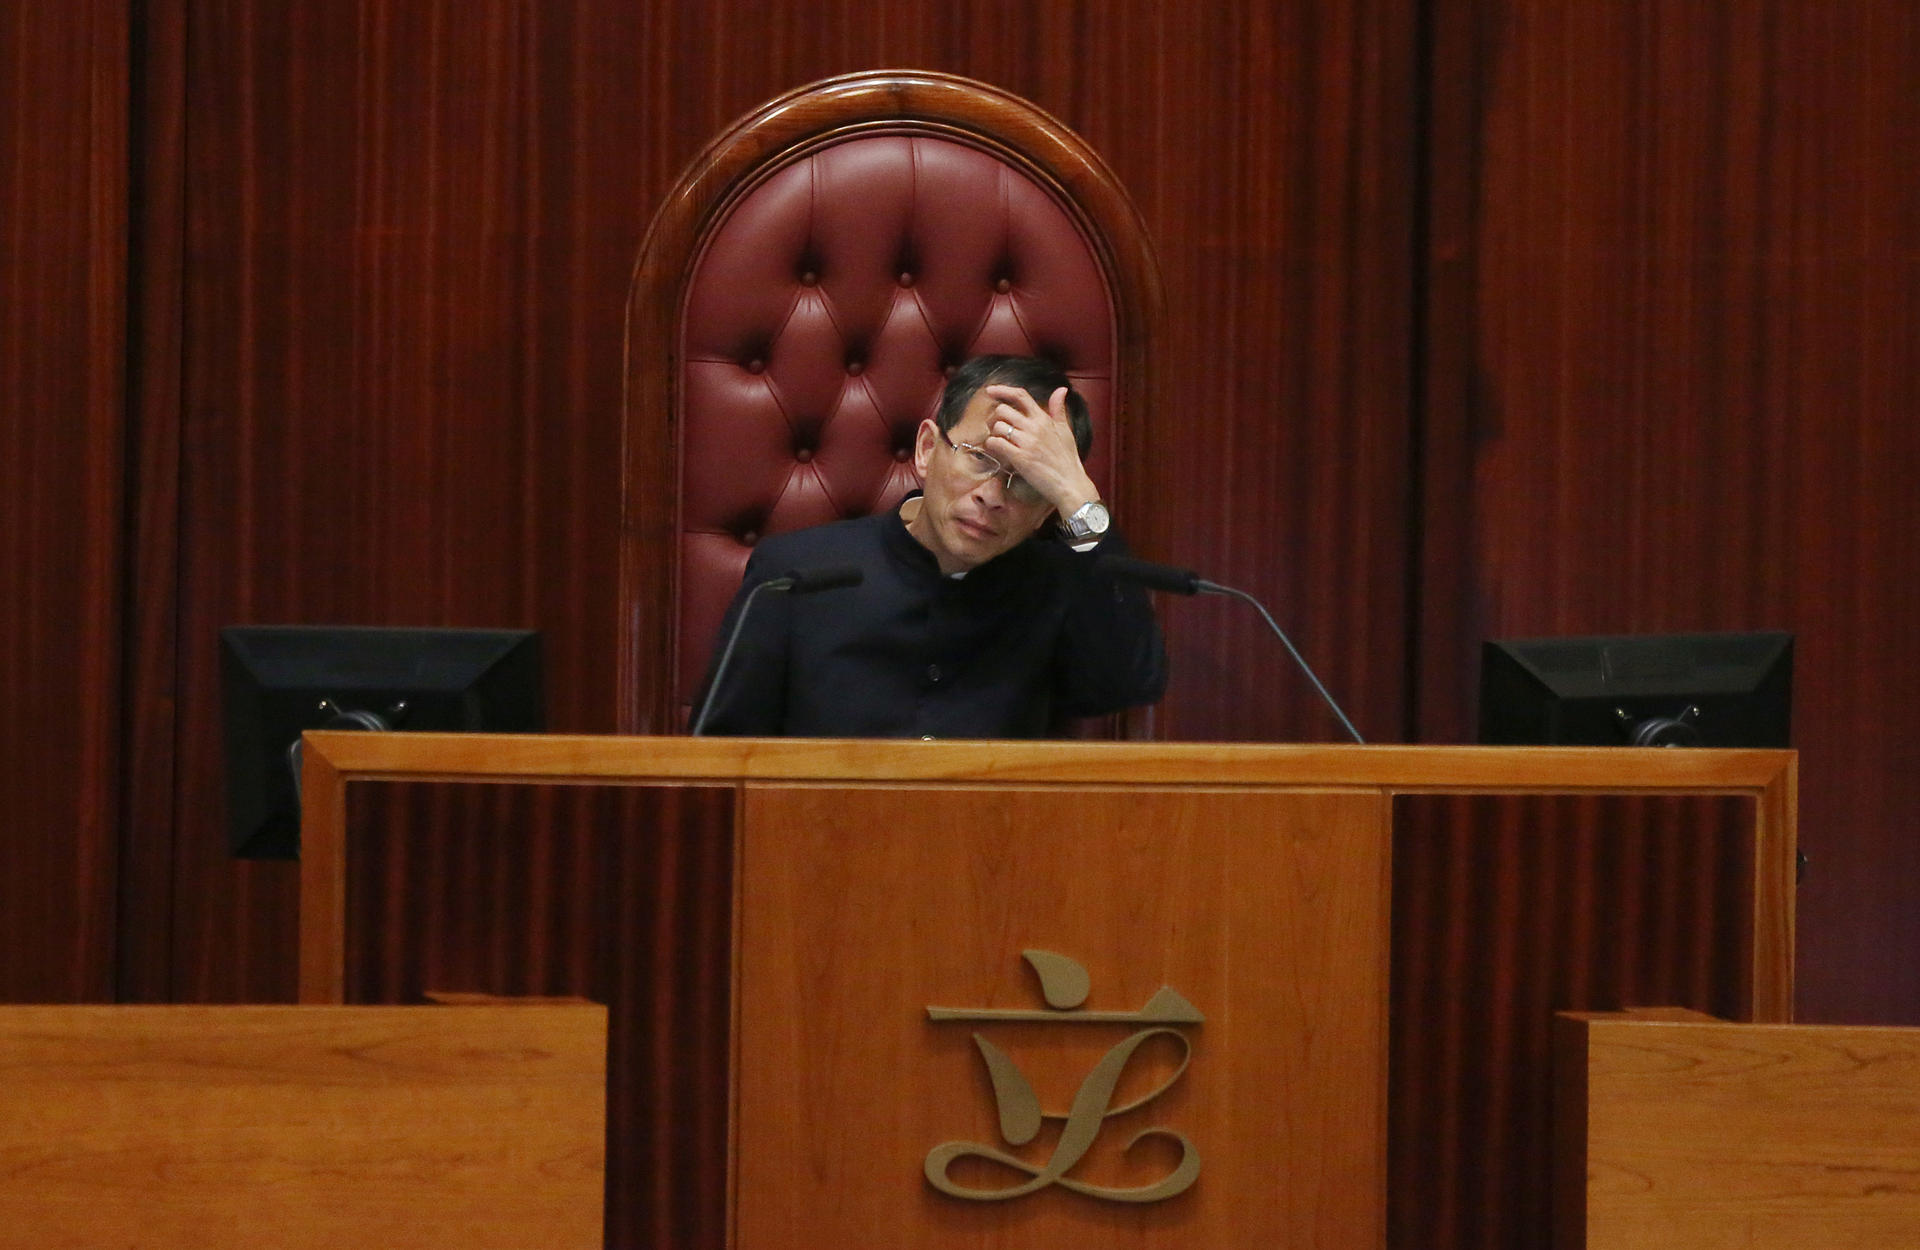 Legco president Jasper Tsang has apologised after the WhatsApp messaging scandal. Photo: Nora Tam